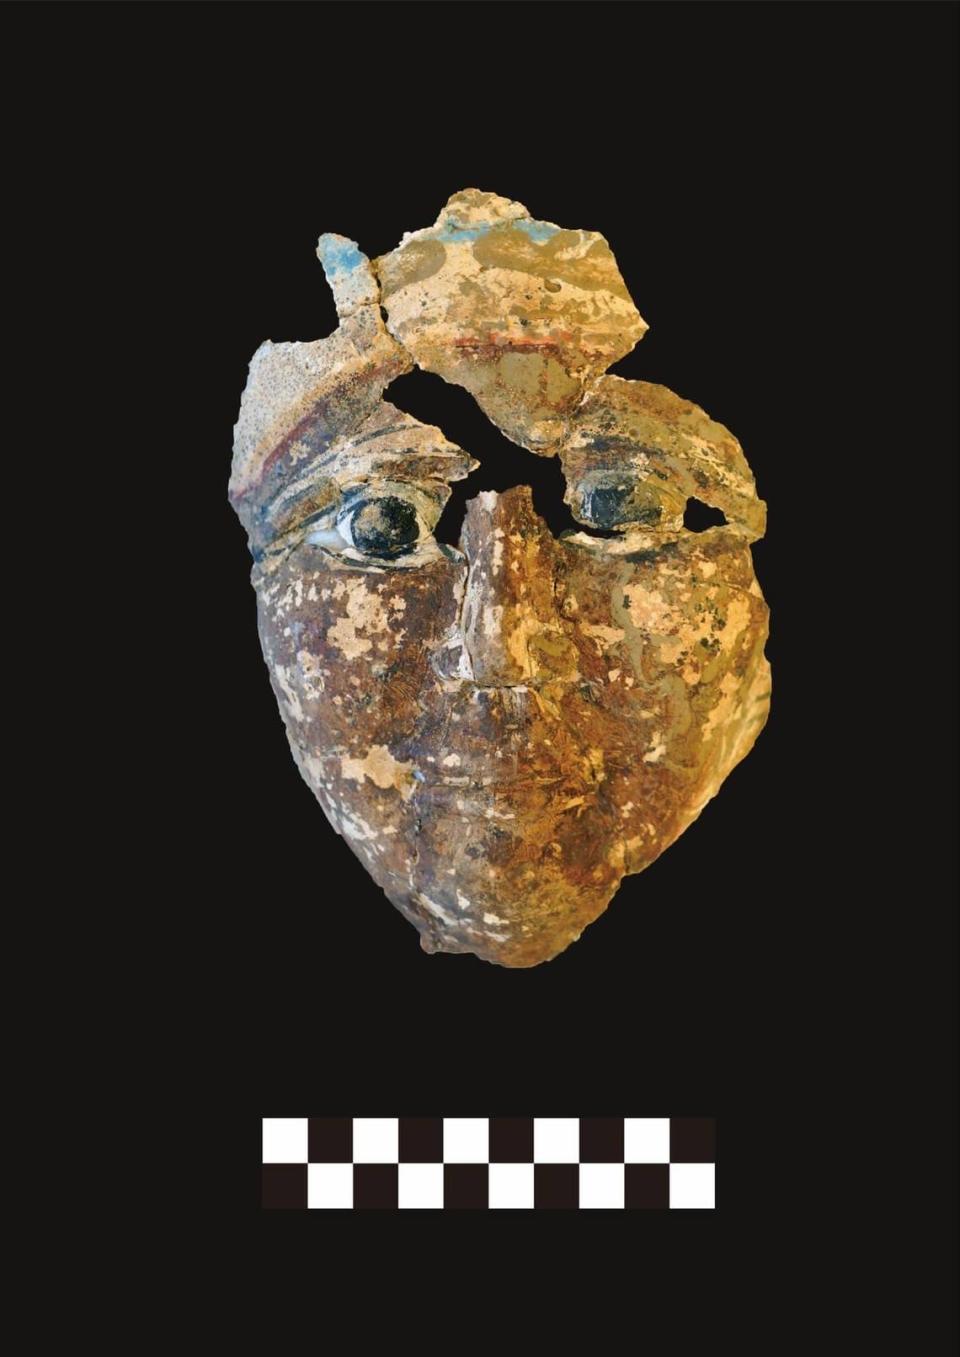 One of the burial masks found at the Saqqara site.